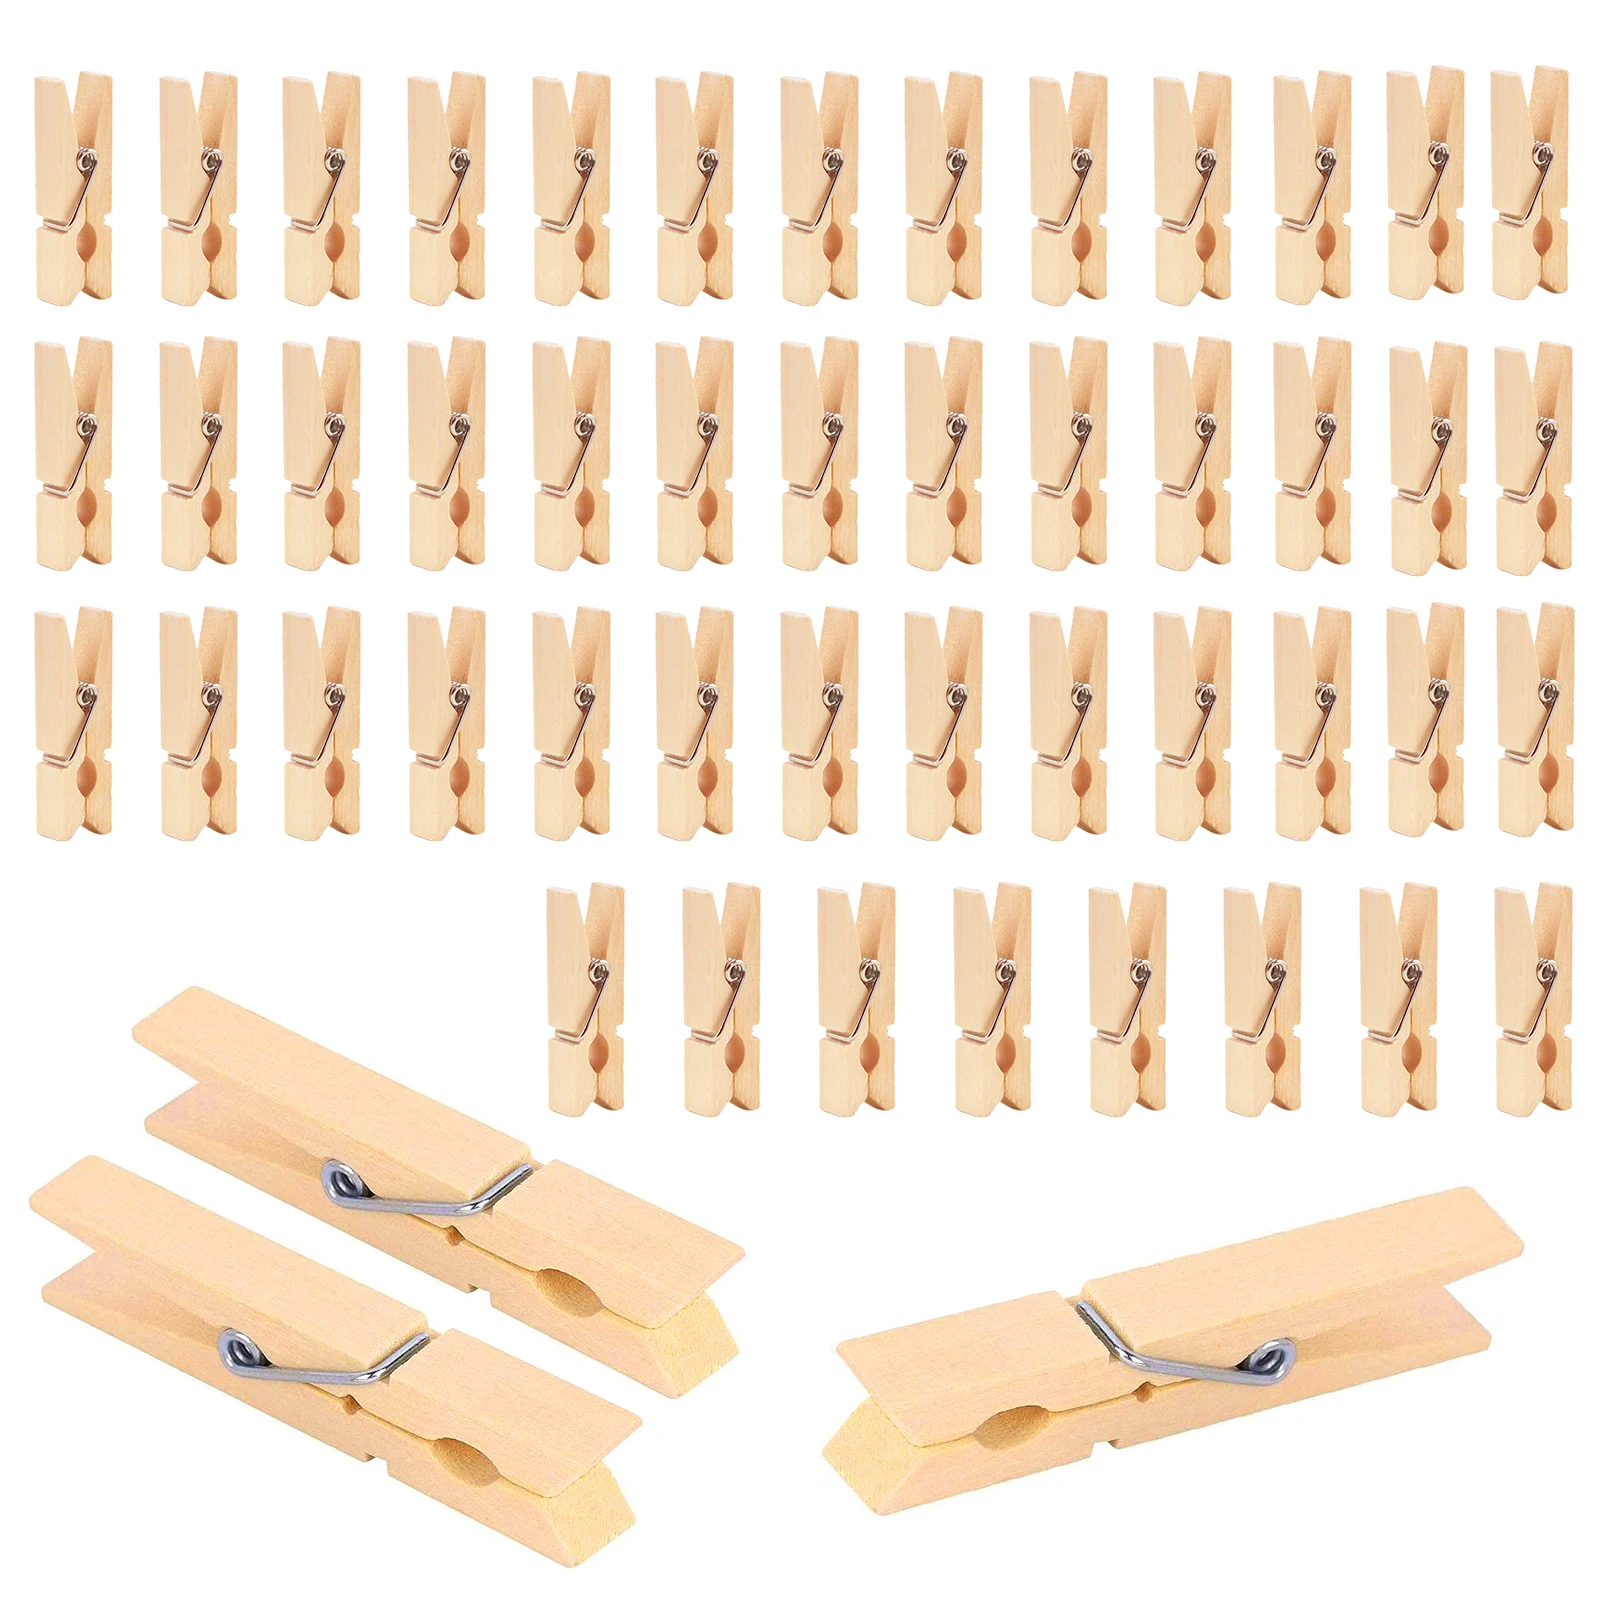 Wooden Clips Small Wooden Clip For DIY Natural Wooden Peg Pin Compatible Gift Wrapping Picture Arts Crafts Photo Display